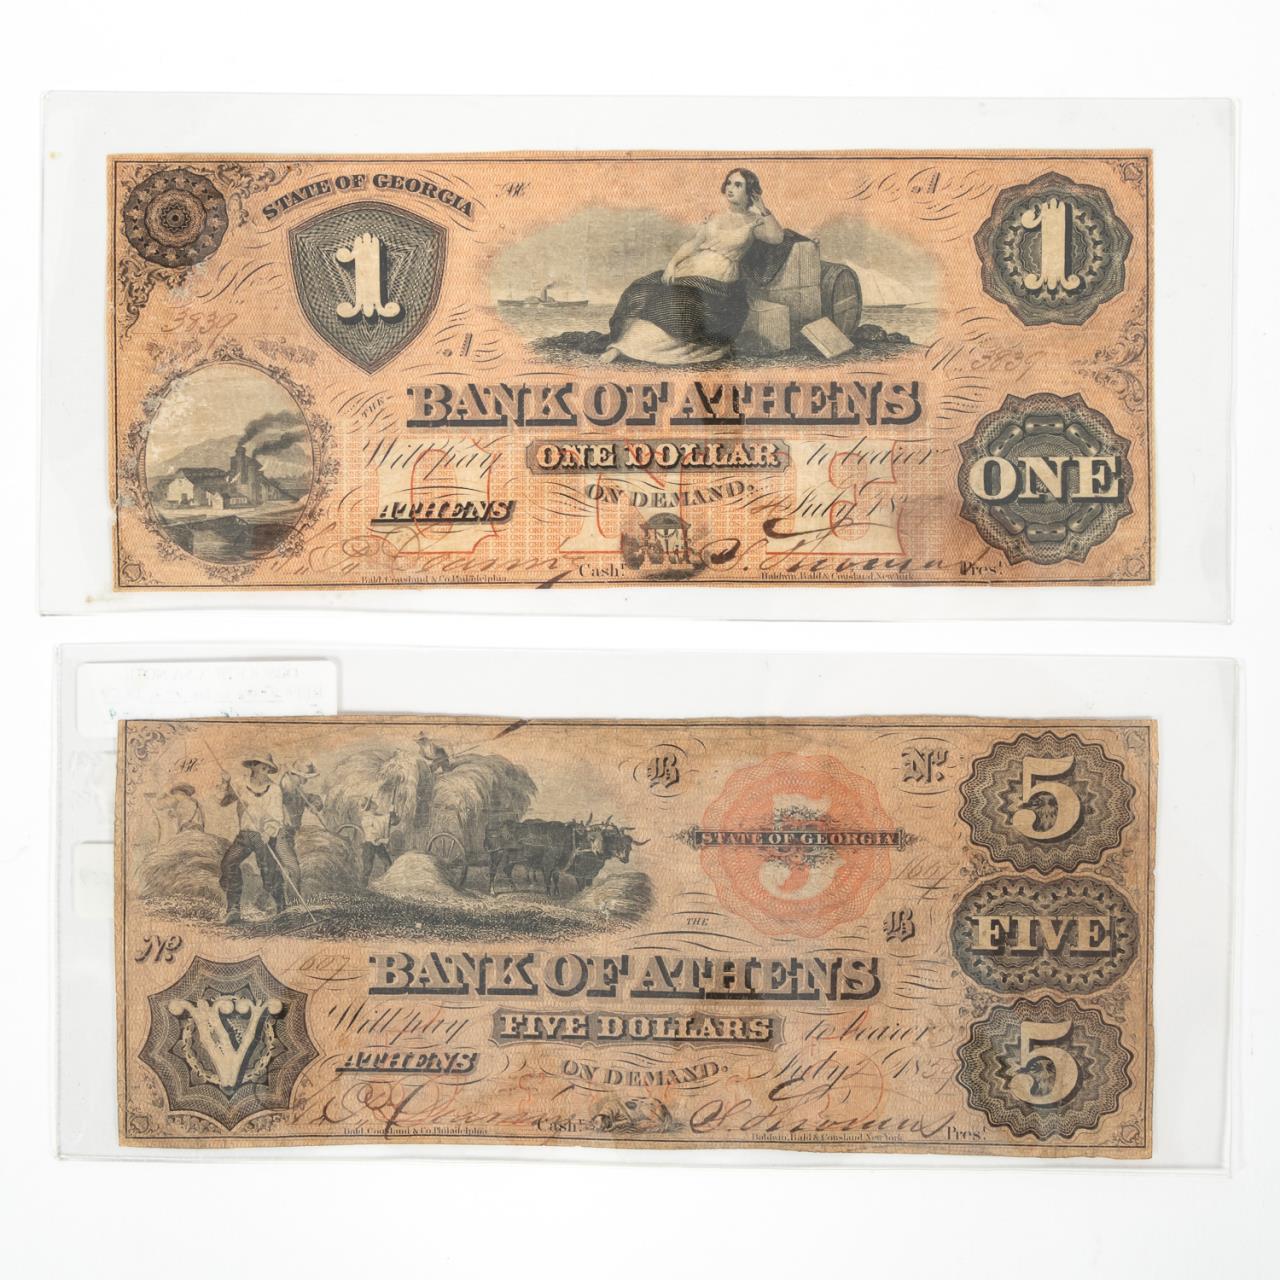 "BANK OF ATHENS" OBSOLETE NOTES,